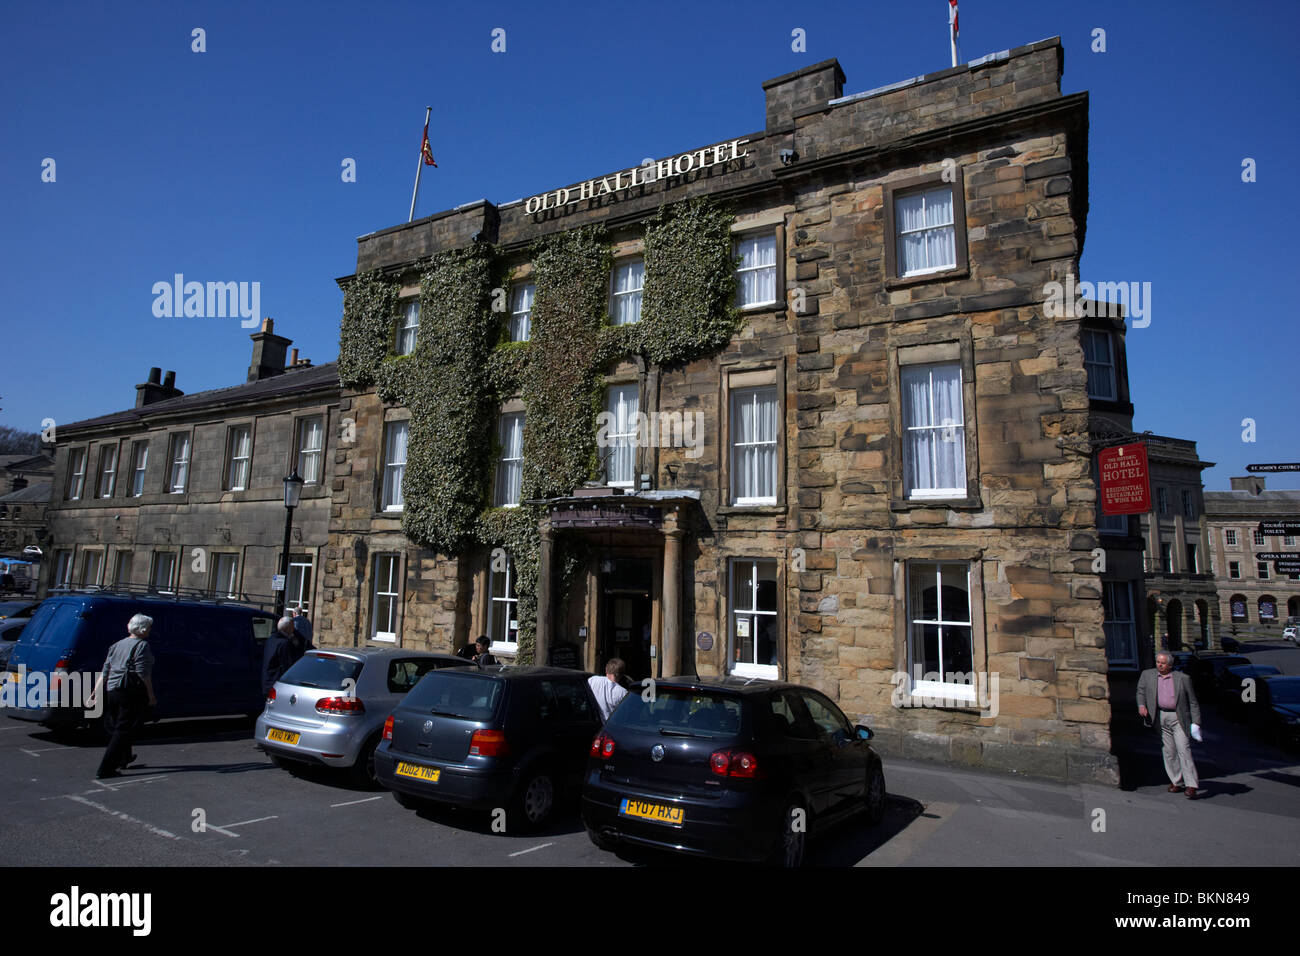 The Old Hall Hotel one of the oldest buildings in Buxton Derbyshire England UK Stock Photo